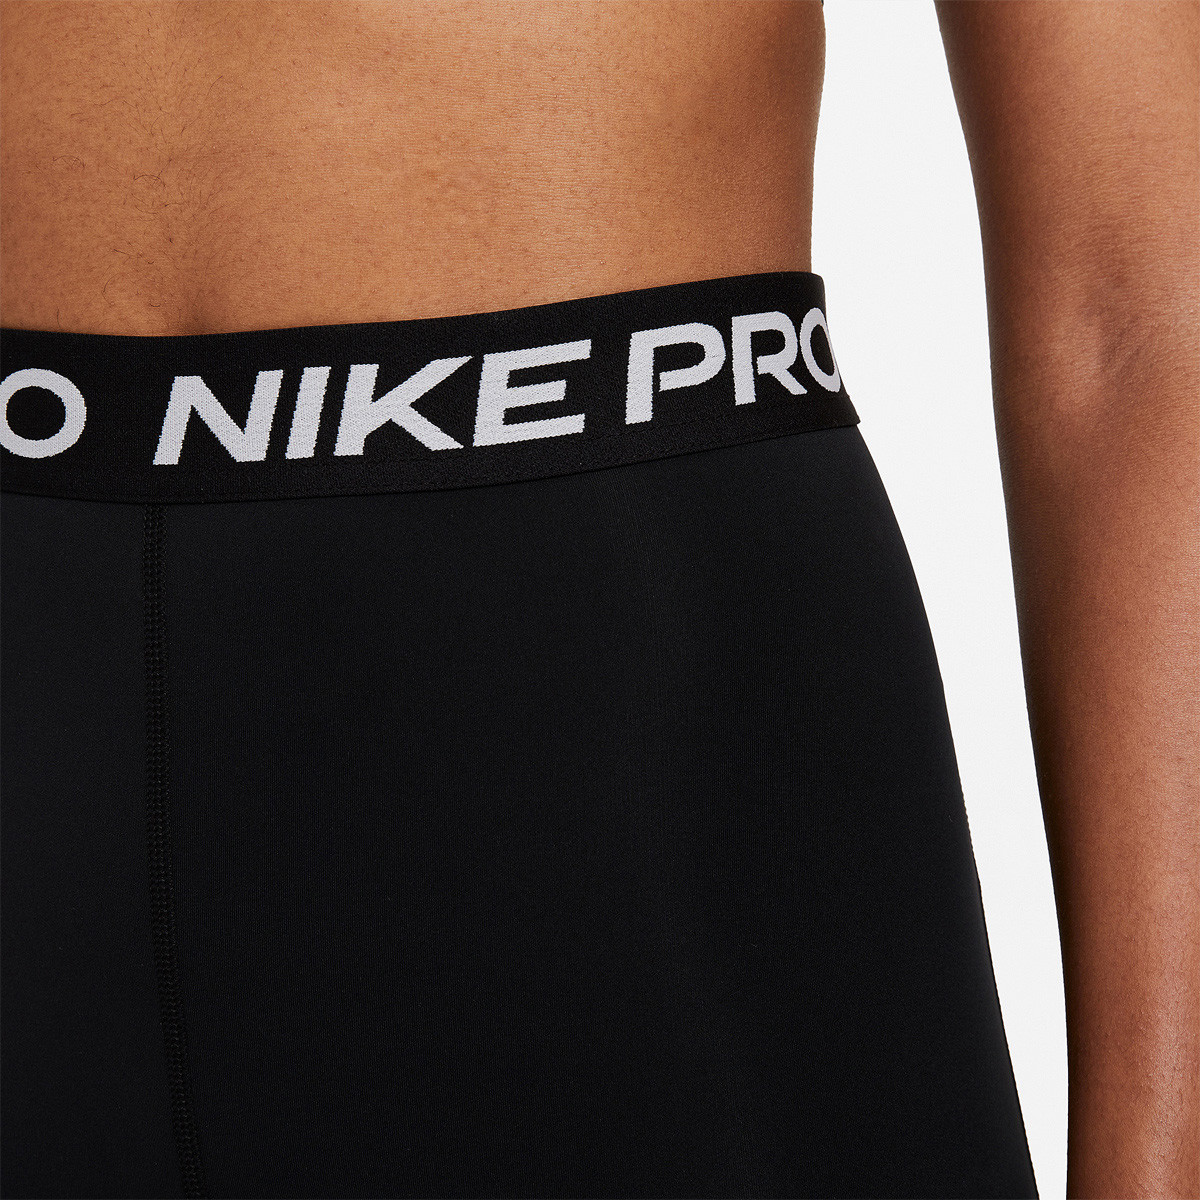 Buy Nike Pro 365 Training Tights Women from £22.95 (Today) – Best Deals on